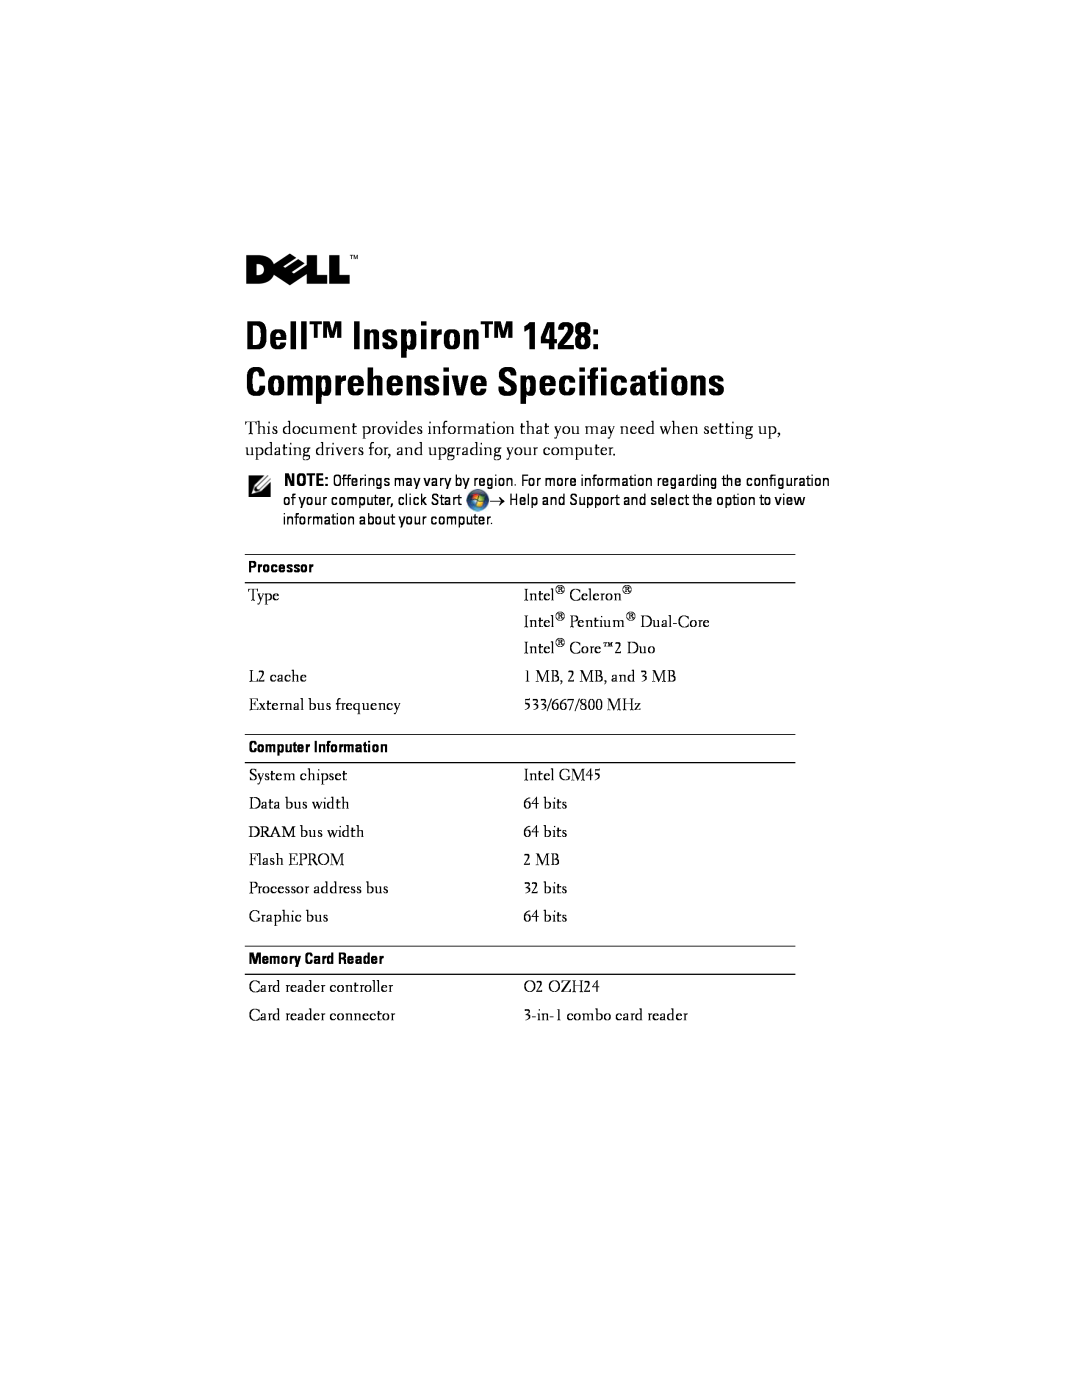 Dell 1428 specifications Processor, Computer Information, Memory Card Reader 